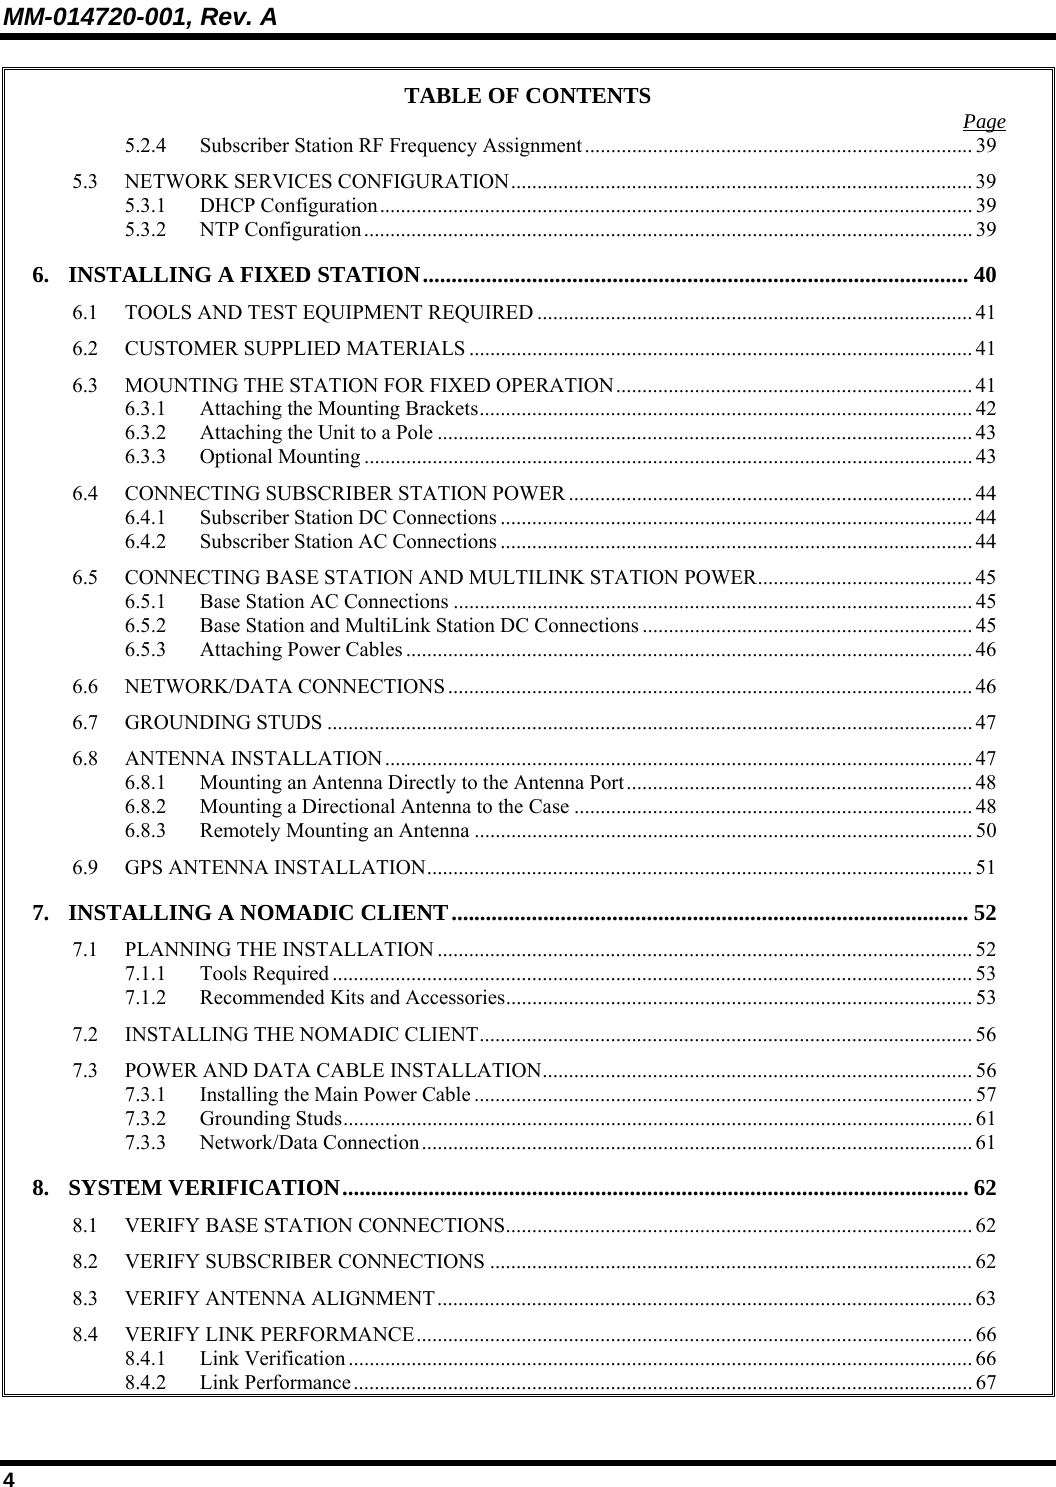 MM-014720-001, Rev. A 4 TABLE OF CONTENTS  Page 5.2.4 Subscriber Station RF Frequency Assignment.......................................................................... 39 5.3 NETWORK SERVICES CONFIGURATION........................................................................................ 39 5.3.1 DHCP Configuration................................................................................................................. 39 5.3.2 NTP Configuration.................................................................................................................... 39 6. INSTALLING A FIXED STATION............................................................................................... 40 6.1 TOOLS AND TEST EQUIPMENT REQUIRED ................................................................................... 41 6.2 CUSTOMER SUPPLIED MATERIALS ................................................................................................ 41 6.3 MOUNTING THE STATION FOR FIXED OPERATION.................................................................... 41 6.3.1 Attaching the Mounting Brackets.............................................................................................. 42 6.3.2 Attaching the Unit to a Pole ...................................................................................................... 43 6.3.3 Optional Mounting .................................................................................................................... 43 6.4 CONNECTING SUBSCRIBER STATION POWER ............................................................................. 44 6.4.1 Subscriber Station DC Connections .......................................................................................... 44 6.4.2 Subscriber Station AC Connections .......................................................................................... 44 6.5 CONNECTING BASE STATION AND MULTILINK STATION POWER......................................... 45 6.5.1 Base Station AC Connections ................................................................................................... 45 6.5.2 Base Station and MultiLink Station DC Connections ............................................................... 45 6.5.3 Attaching Power Cables ............................................................................................................ 46 6.6 NETWORK/DATA CONNECTIONS .................................................................................................... 46 6.7 GROUNDING STUDS ........................................................................................................................... 47 6.8 ANTENNA INSTALLATION................................................................................................................ 47 6.8.1 Mounting an Antenna Directly to the Antenna Port.................................................................. 48 6.8.2 Mounting a Directional Antenna to the Case ............................................................................ 48 6.8.3 Remotely Mounting an Antenna ............................................................................................... 50 6.9 GPS ANTENNA INSTALLATION........................................................................................................51 7. INSTALLING A NOMADIC CLIENT.......................................................................................... 52 7.1 PLANNING THE INSTALLATION ...................................................................................................... 52 7.1.1 Tools Required .......................................................................................................................... 53 7.1.2 Recommended Kits and Accessories......................................................................................... 53 7.2 INSTALLING THE NOMADIC CLIENT.............................................................................................. 56 7.3 POWER AND DATA CABLE INSTALLATION.................................................................................. 56 7.3.1 Installing the Main Power Cable ............................................................................................... 57 7.3.2 Grounding Studs........................................................................................................................ 61 7.3.3 Network/Data Connection.........................................................................................................61 8. SYSTEM VERIFICATION.............................................................................................................62 8.1 VERIFY BASE STATION CONNECTIONS......................................................................................... 62 8.2 VERIFY SUBSCRIBER CONNECTIONS ............................................................................................ 62 8.3 VERIFY ANTENNA ALIGNMENT...................................................................................................... 63 8.4 VERIFY LINK PERFORMANCE.......................................................................................................... 66 8.4.1 Link Verification ....................................................................................................................... 66 8.4.2 Link Performance...................................................................................................................... 67 